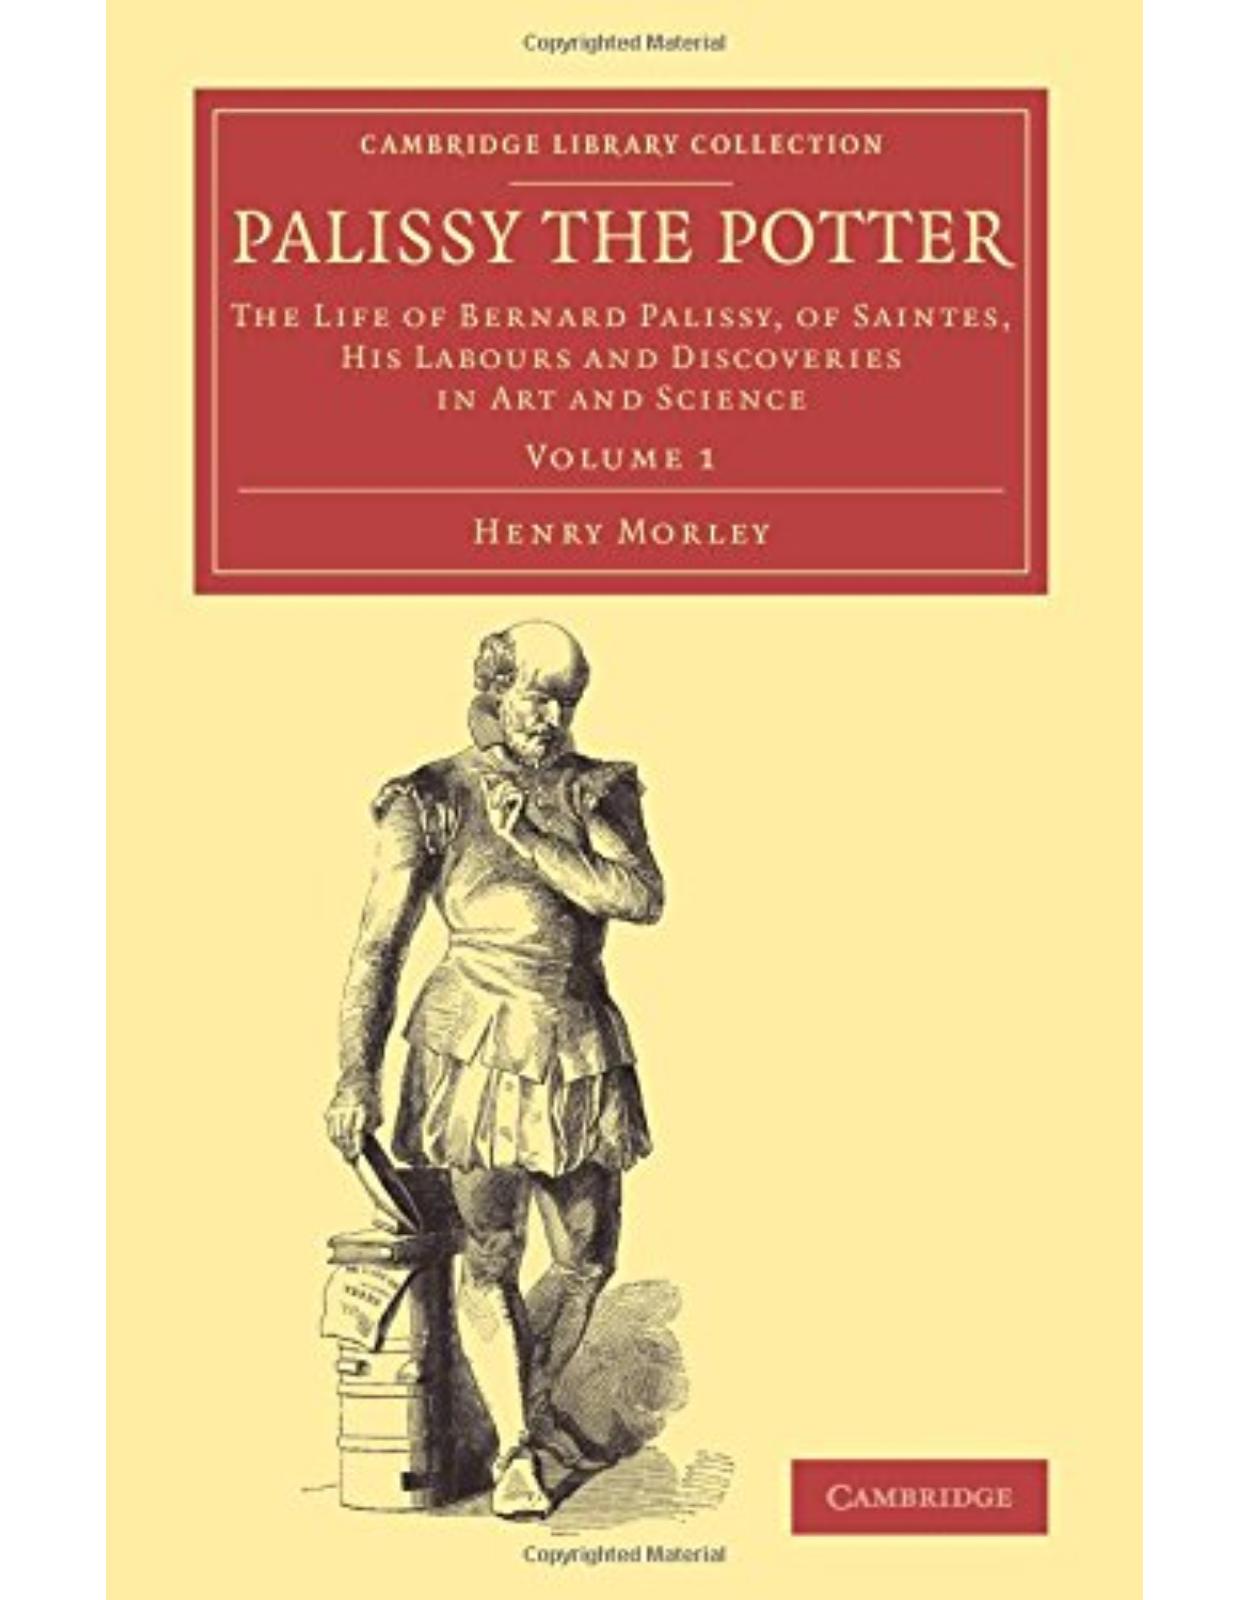 Palissy the Potter: The Life of Bernard Palissy, of Saintes, his Labours and Discoveries in Art and Science